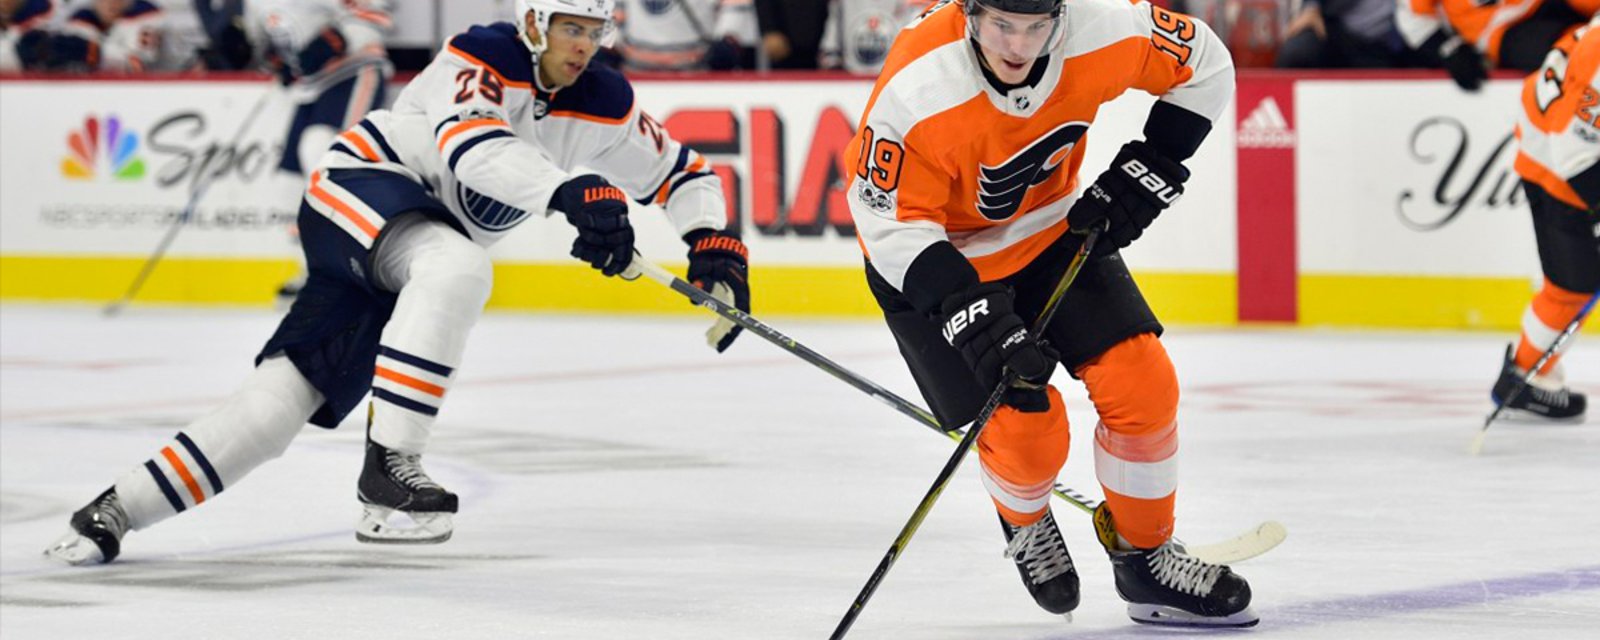 Injury Report: Bad news for Flyers’ Patrick